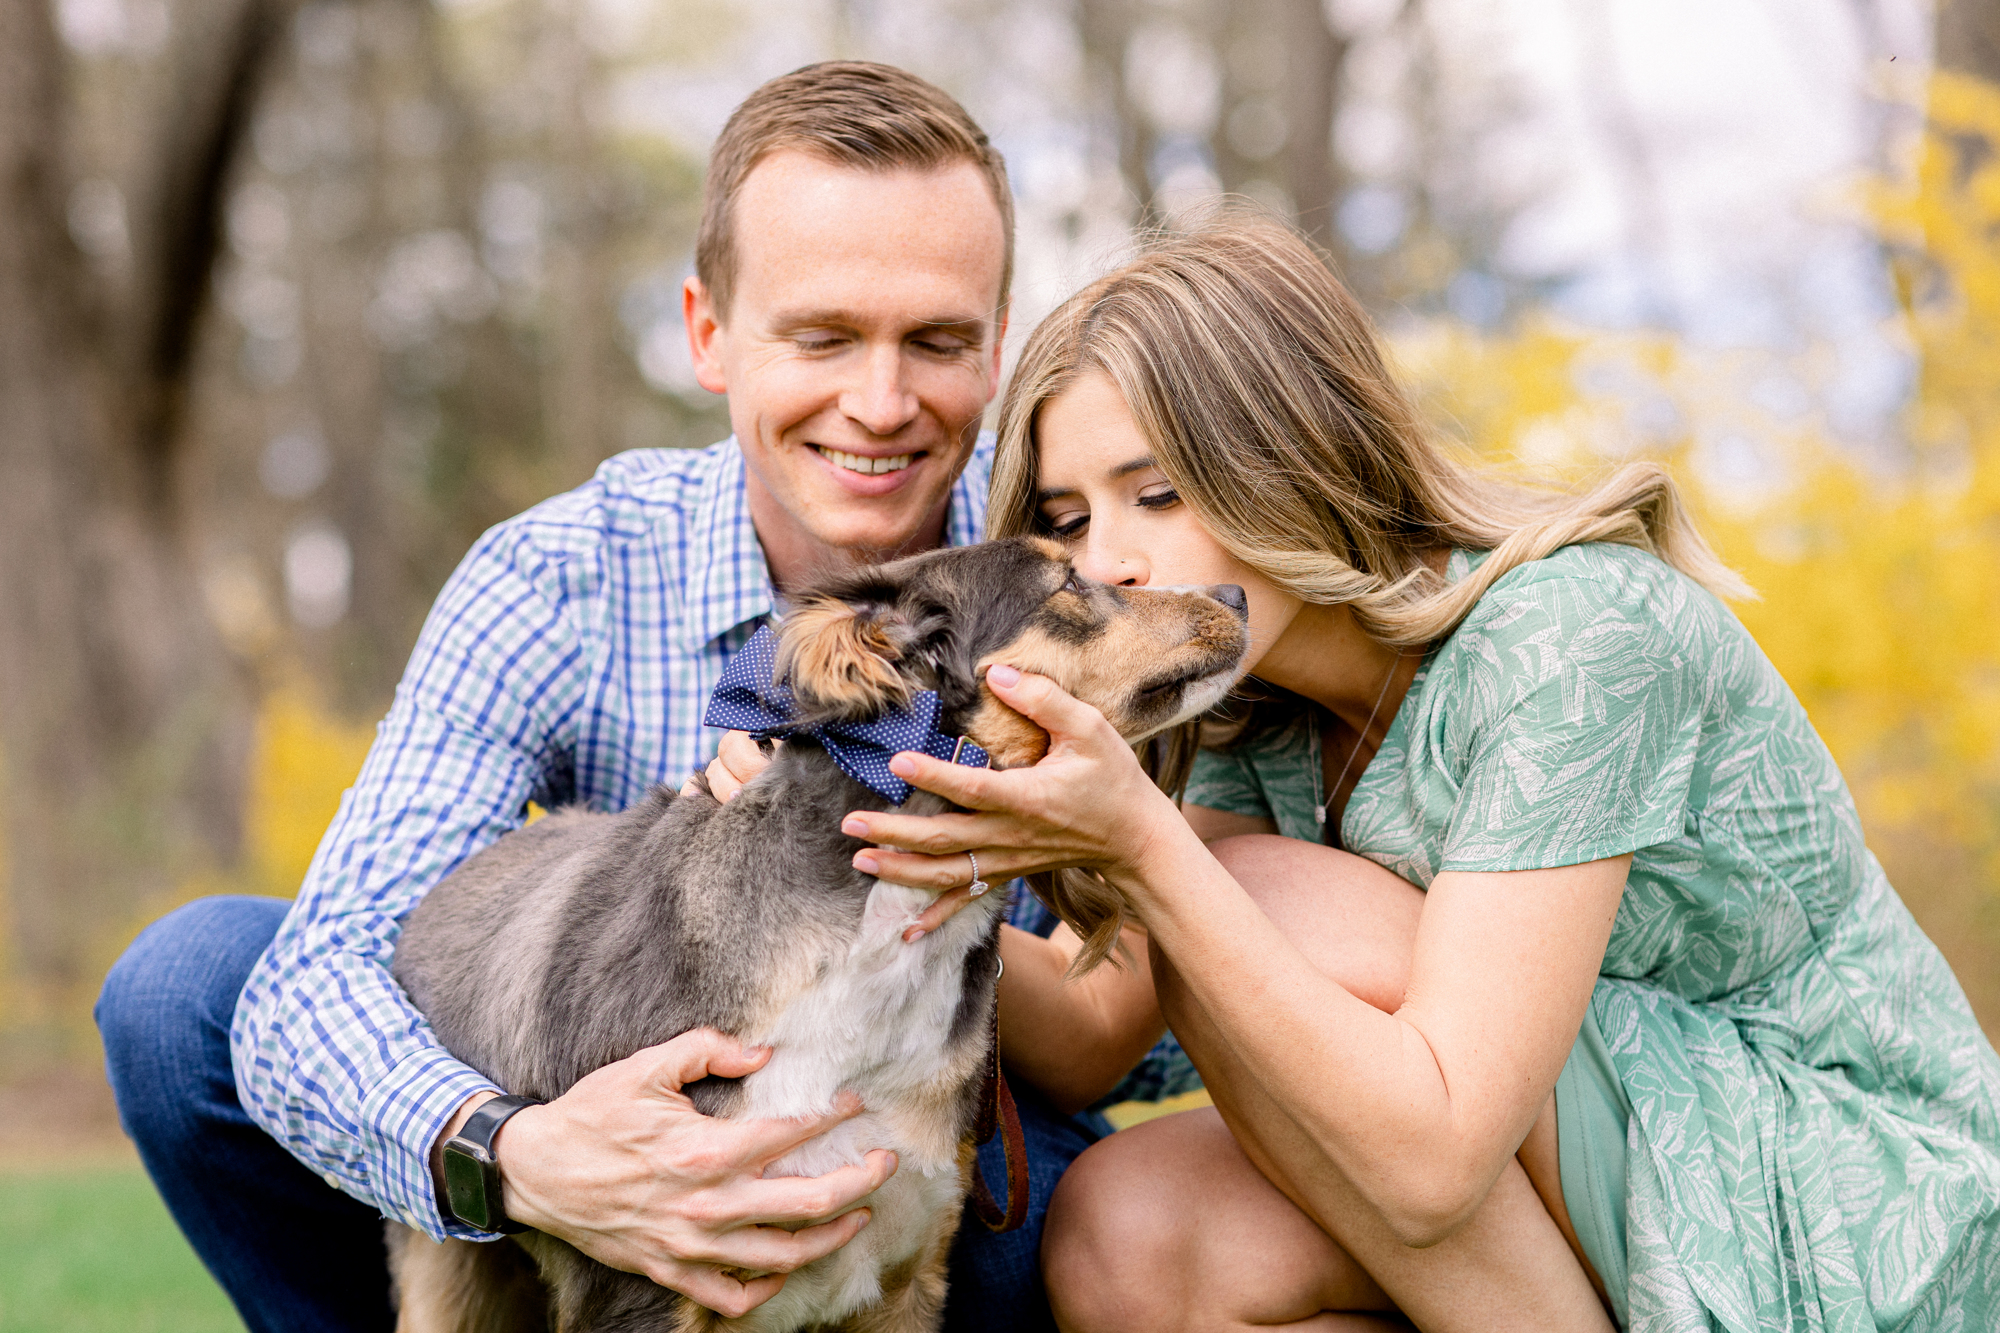 Adorable Waterloo Village Engagement Photos in Springy New Jersey